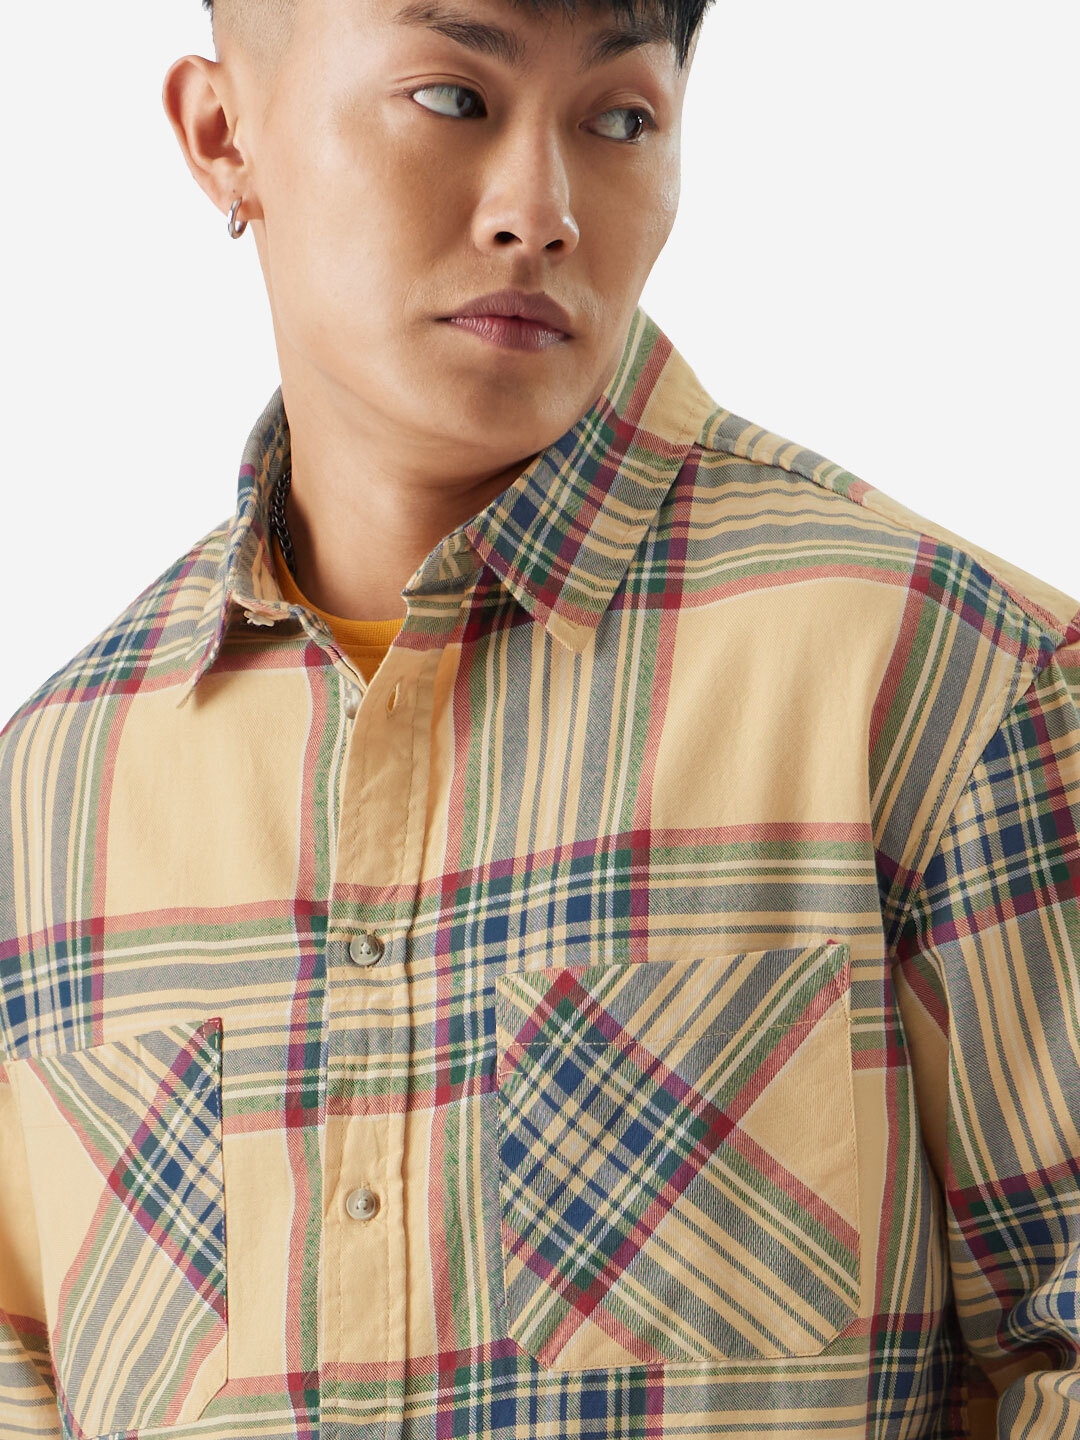 The Souled Store | Men's Plaid: Muted Canvas Men's Relaxed Shirts